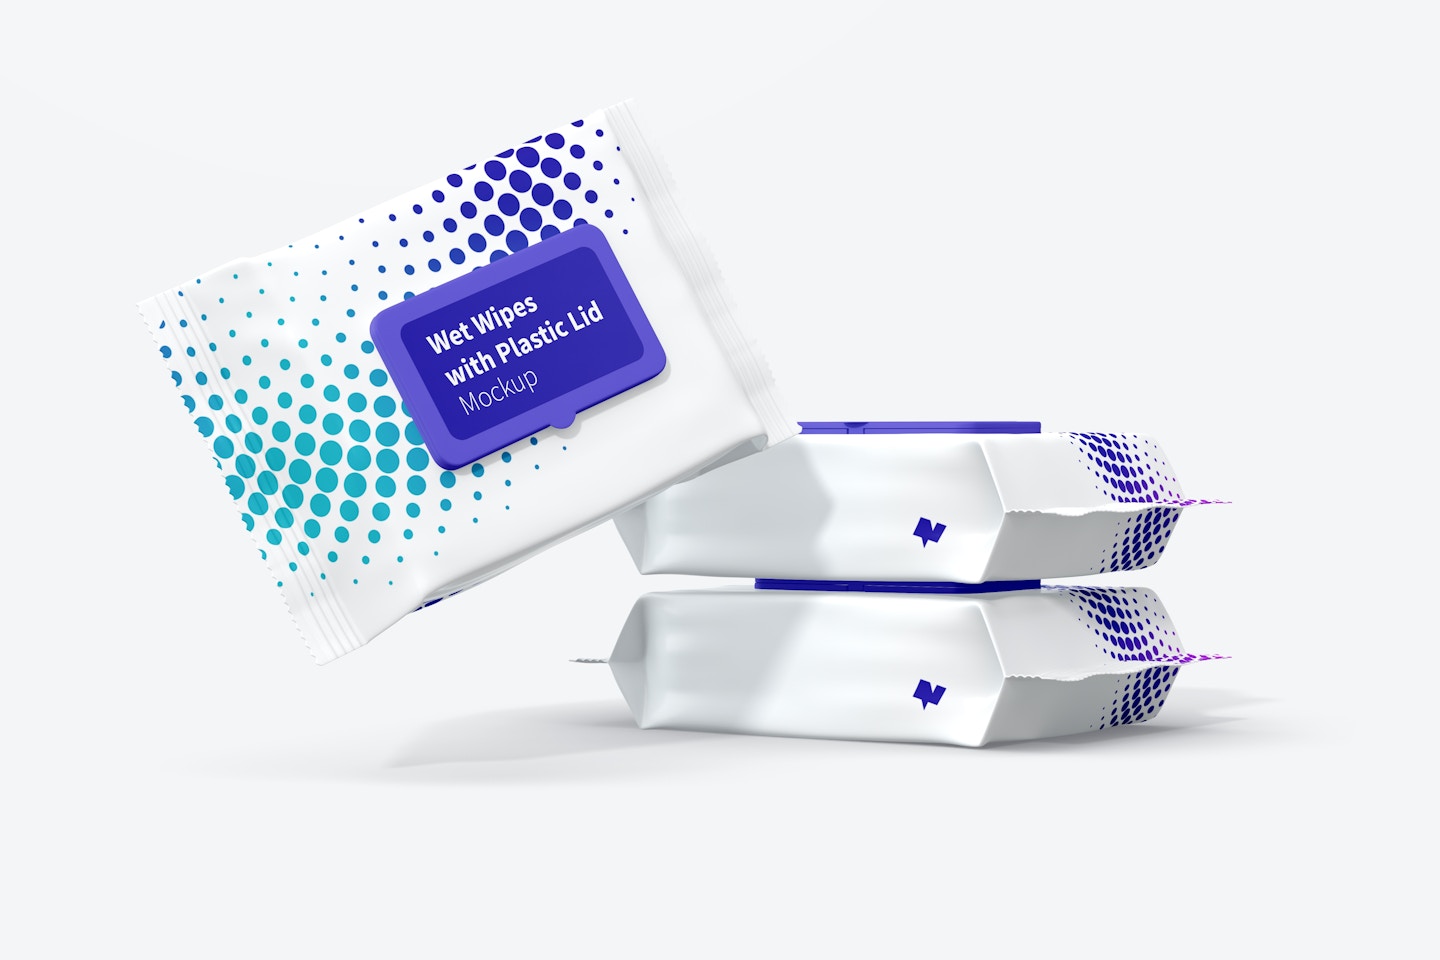 Wet Wipes Large Packaging with Plastic Lid Set Mockup